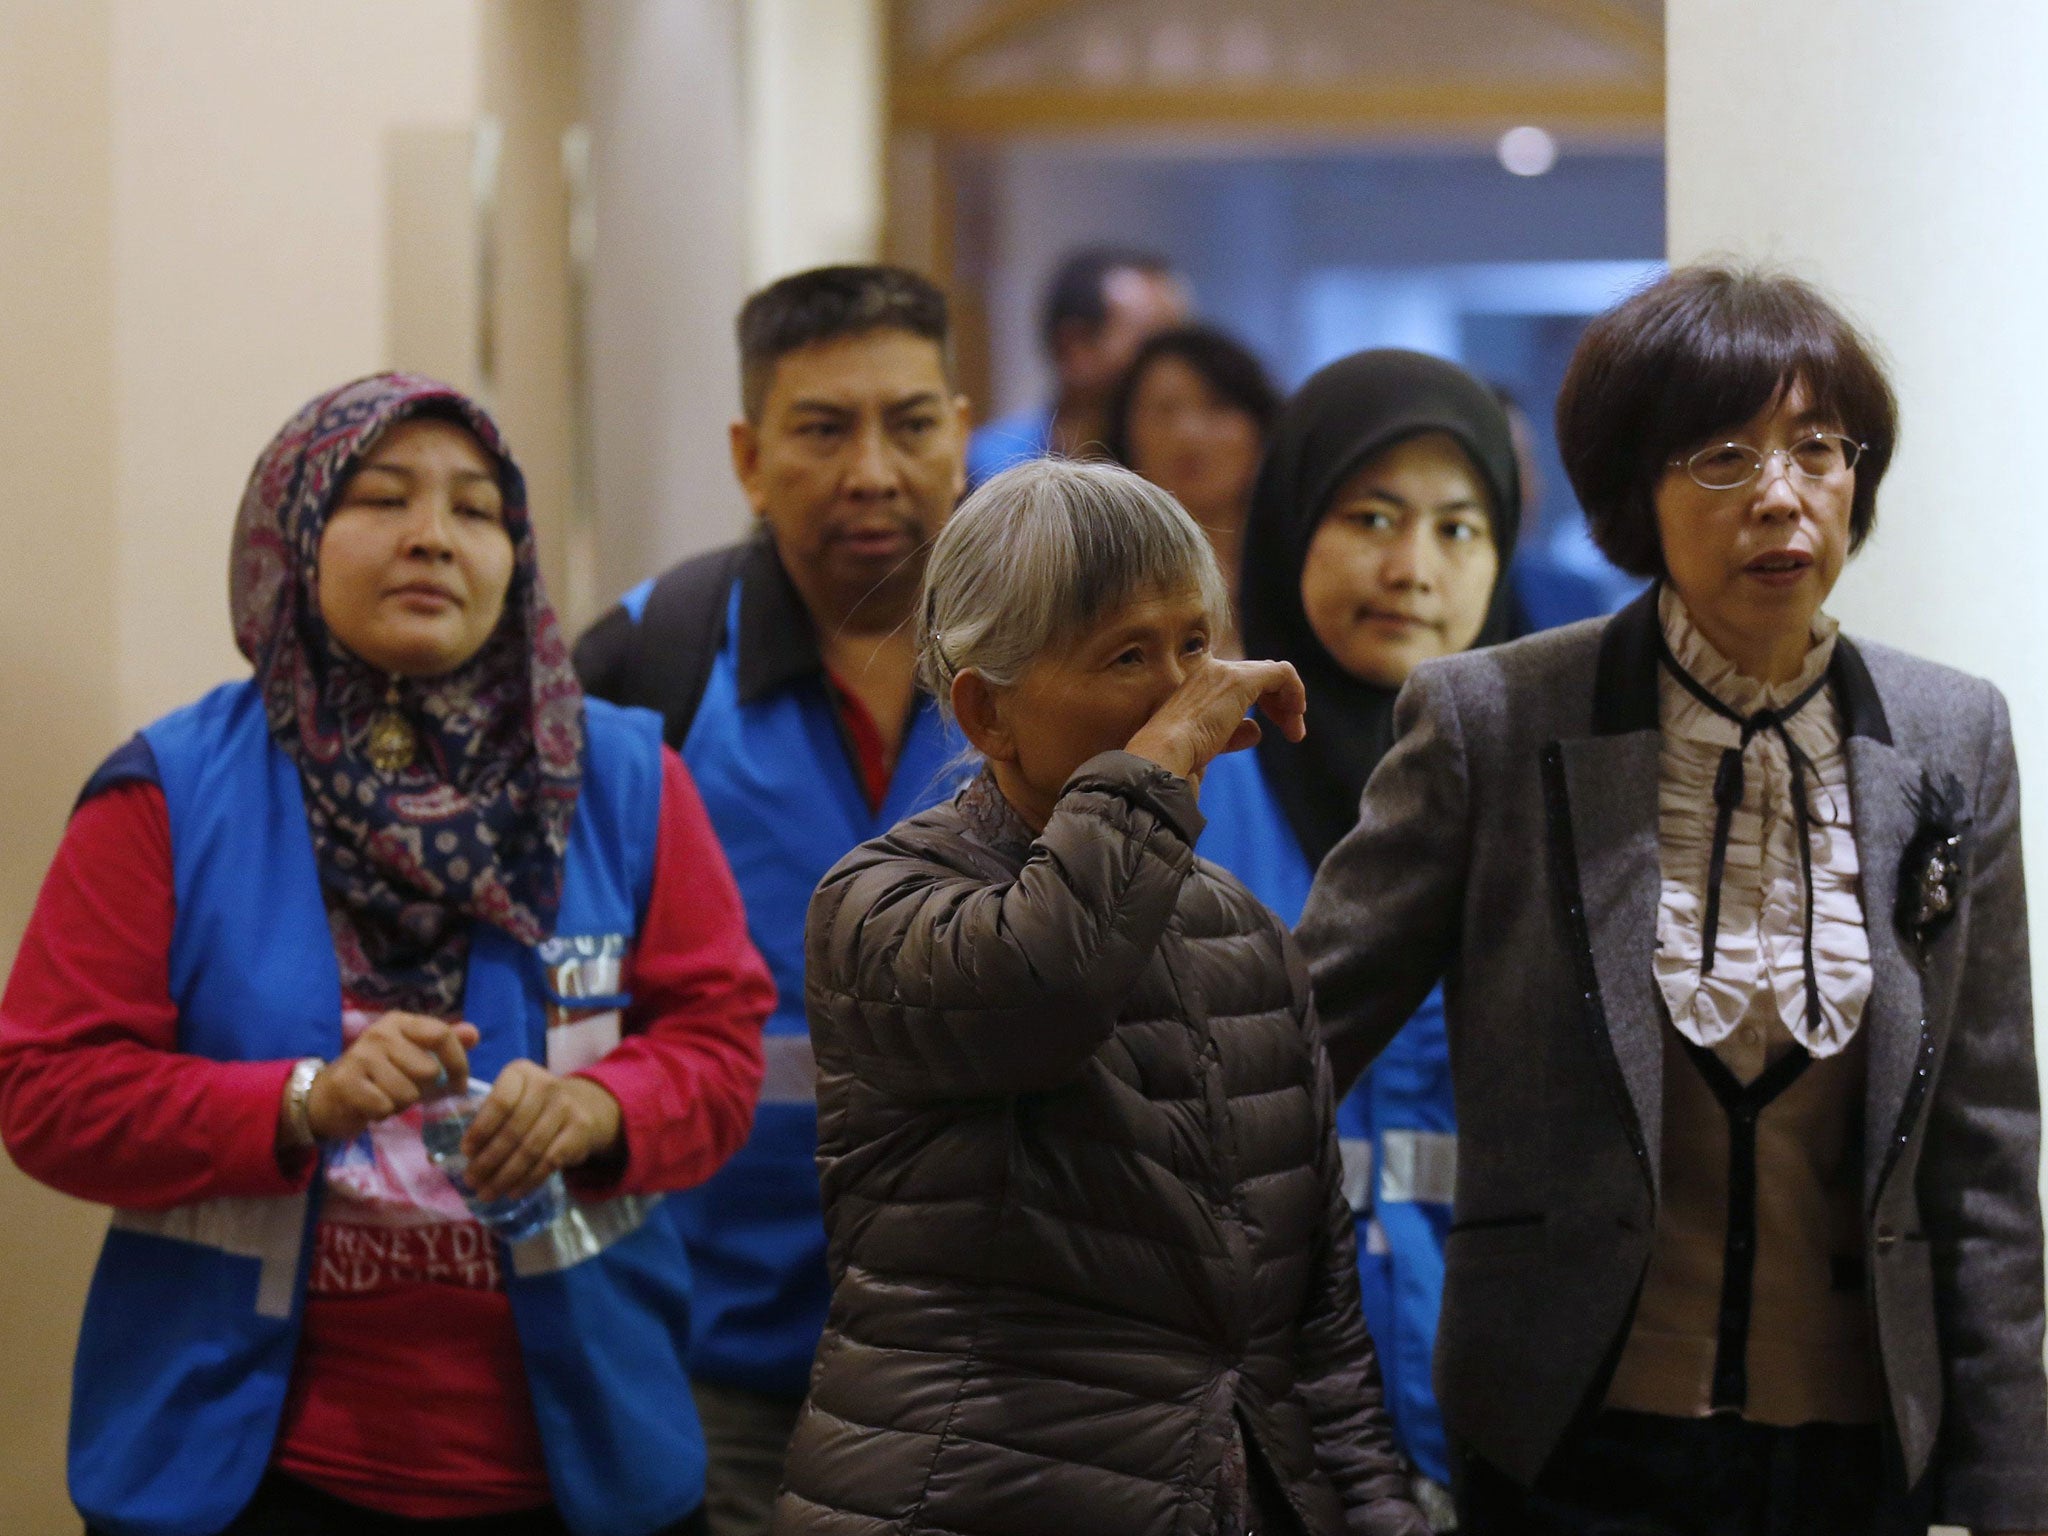 A relative (centre) of a passenger aboard Malaysia Airlines MH370 attends a meeting with volunteers from Malaysia (in blue vests) at the Lido Hotel in Beijing, 27 March, 2014